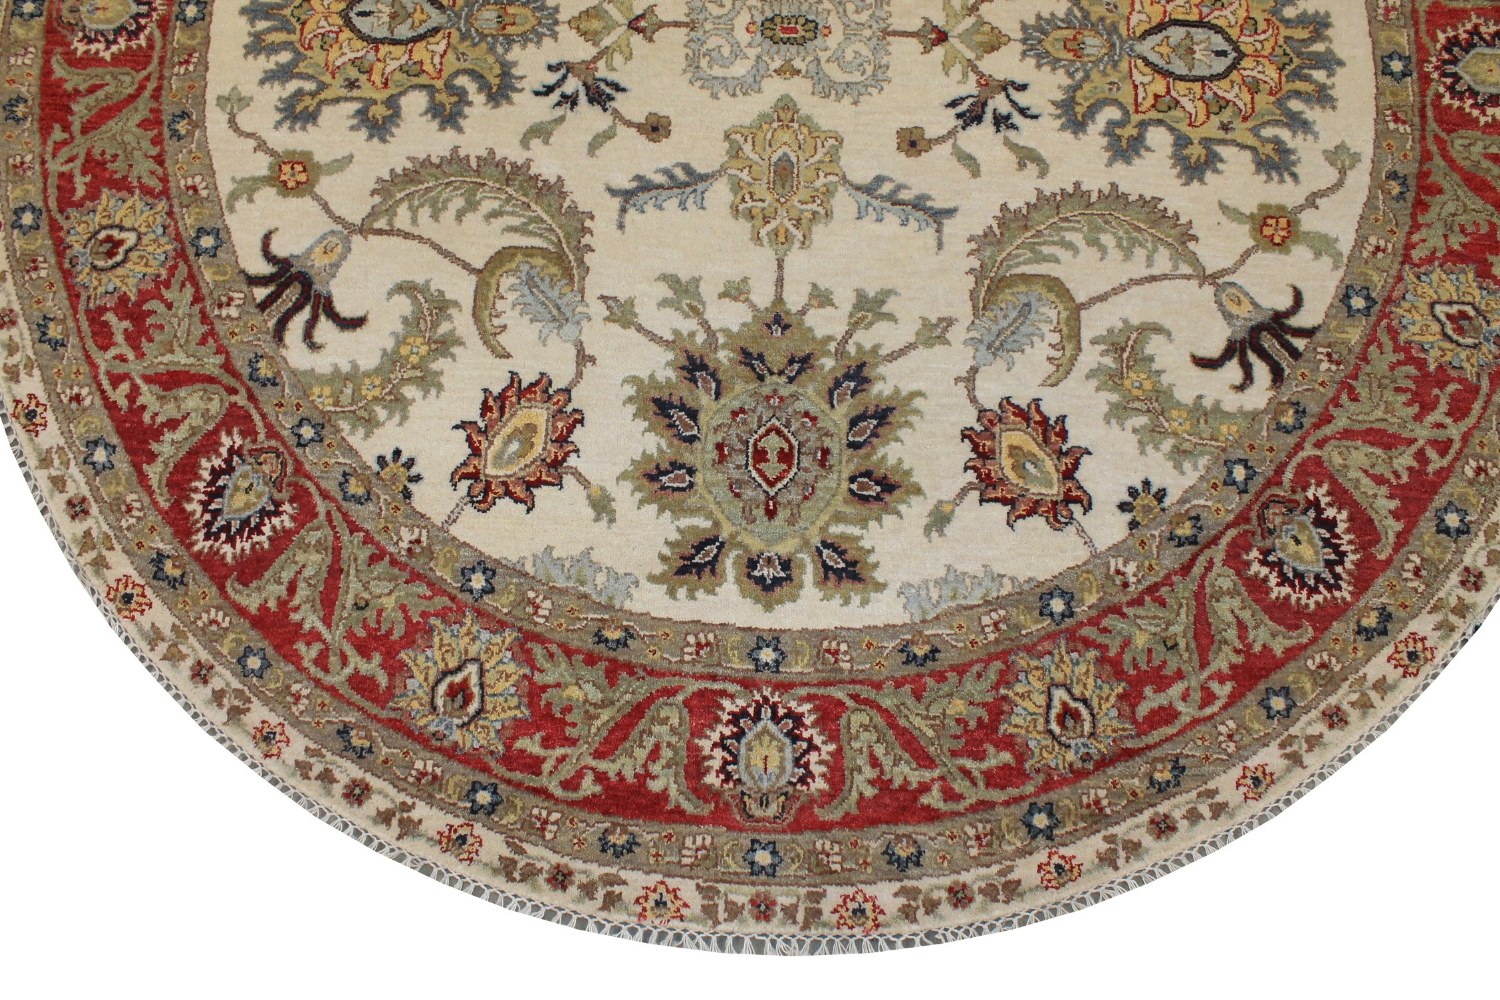 6 ft. - 7 ft. Round & Square Traditional Hand Knotted Wool Area Rug - MR028206